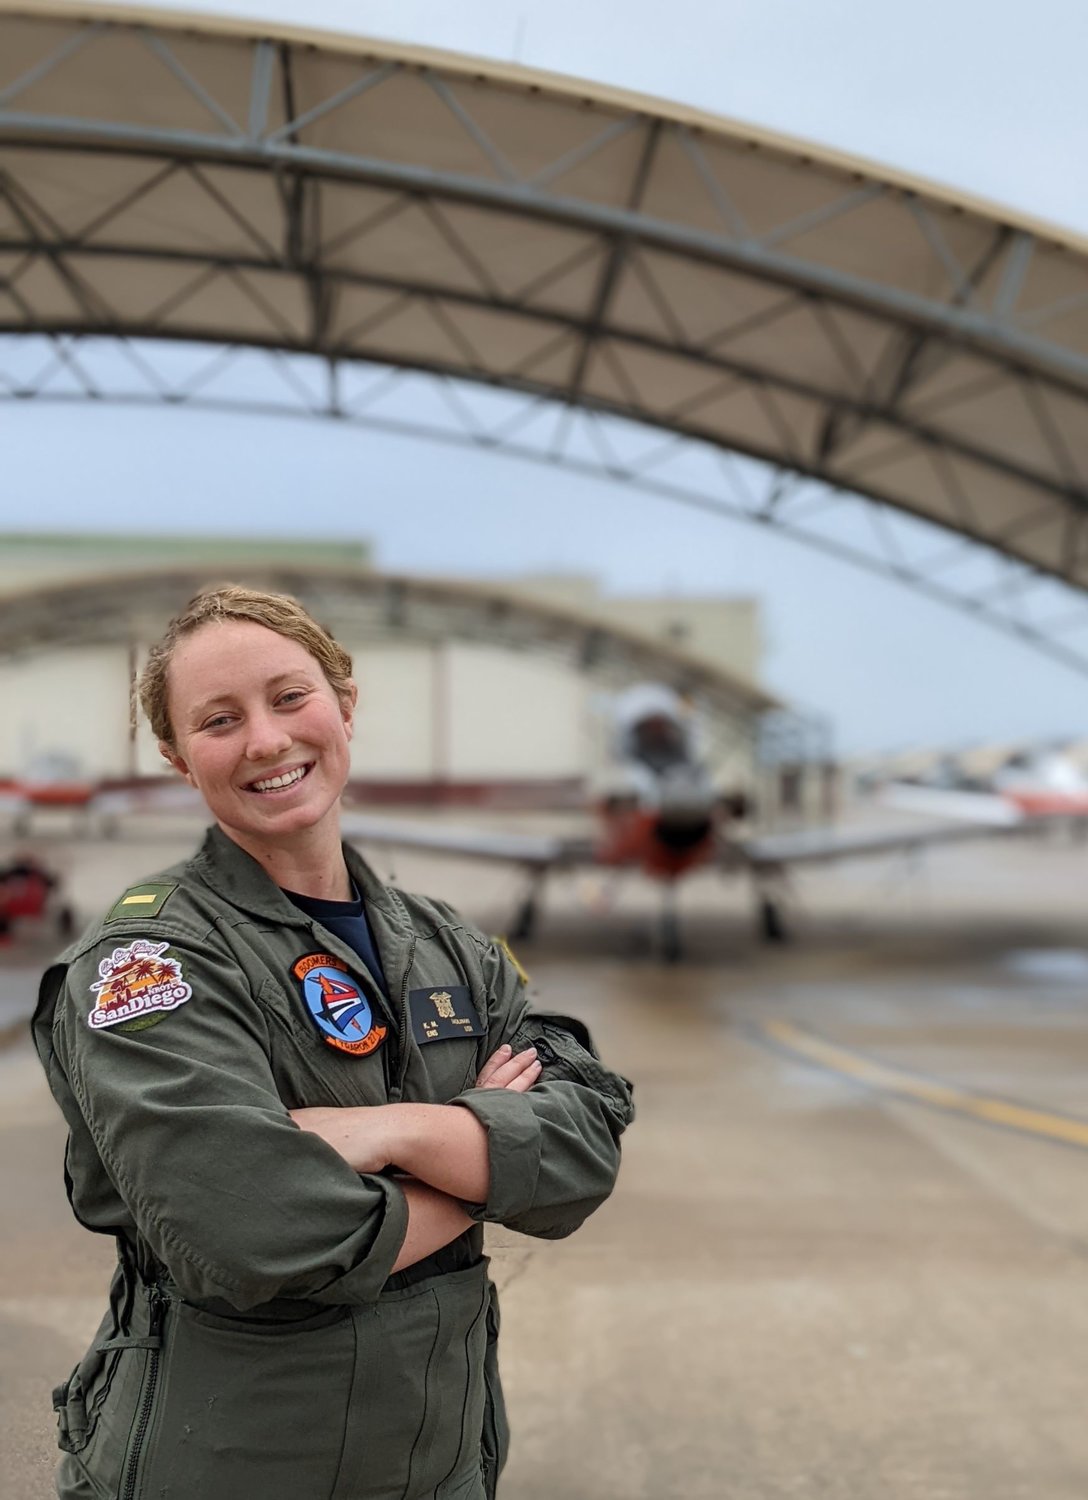 Kaleigh Molinari serves as a student pilot with Training Squadron 27, a primary flight training squadron in Texas.